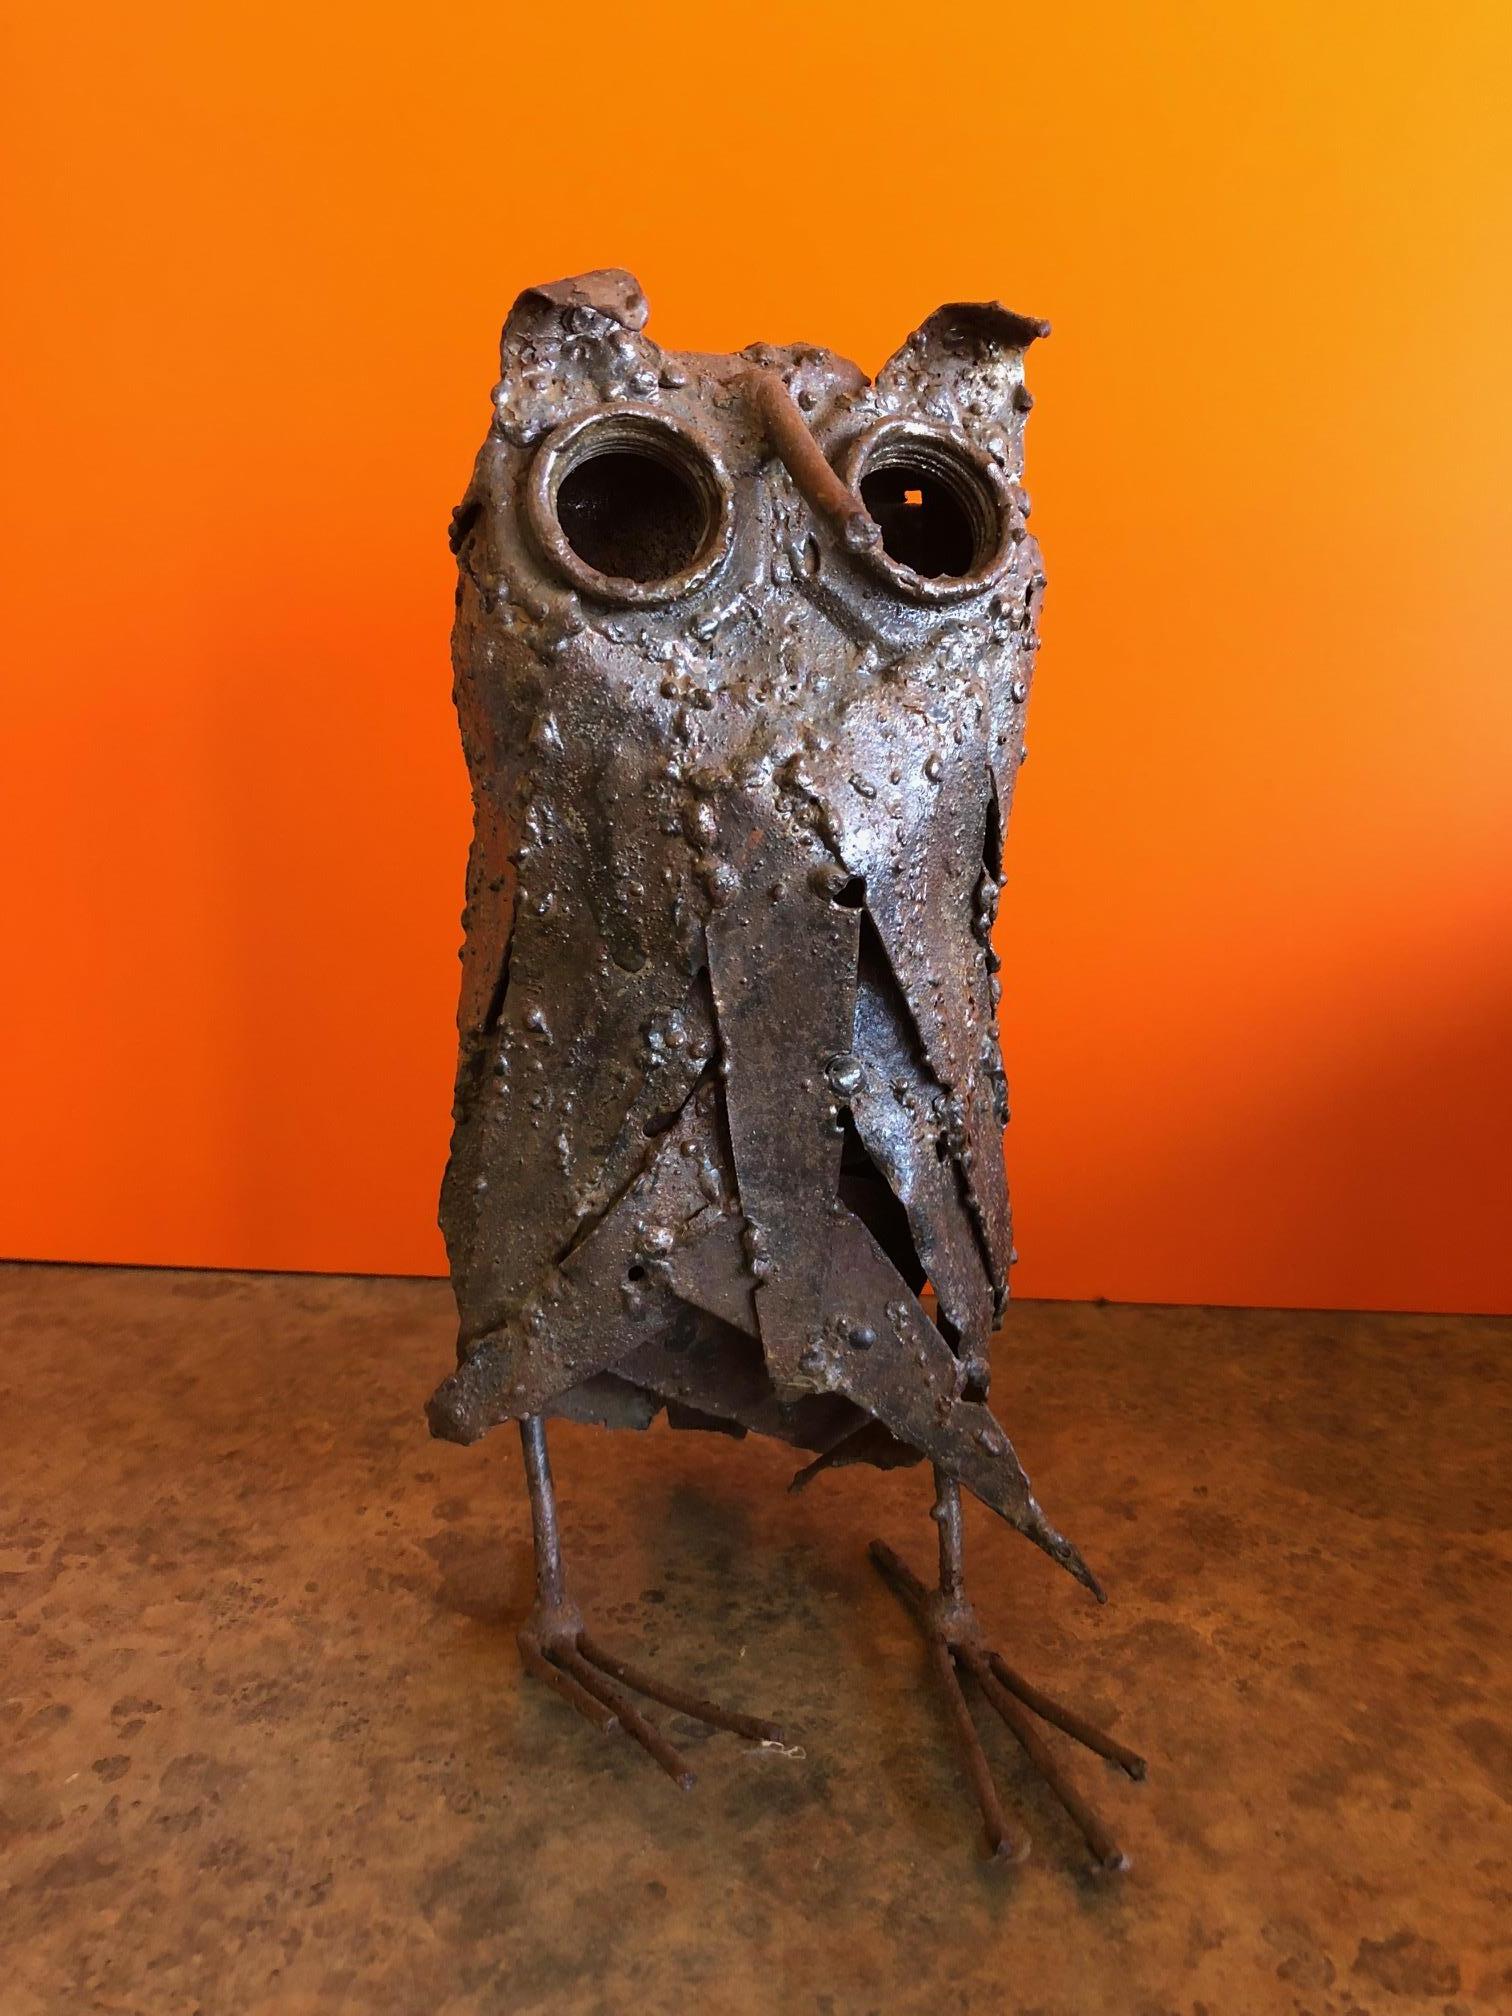 A very cool midcentury brutalist owl sculpture, circa 1960s. The piece is 9.5